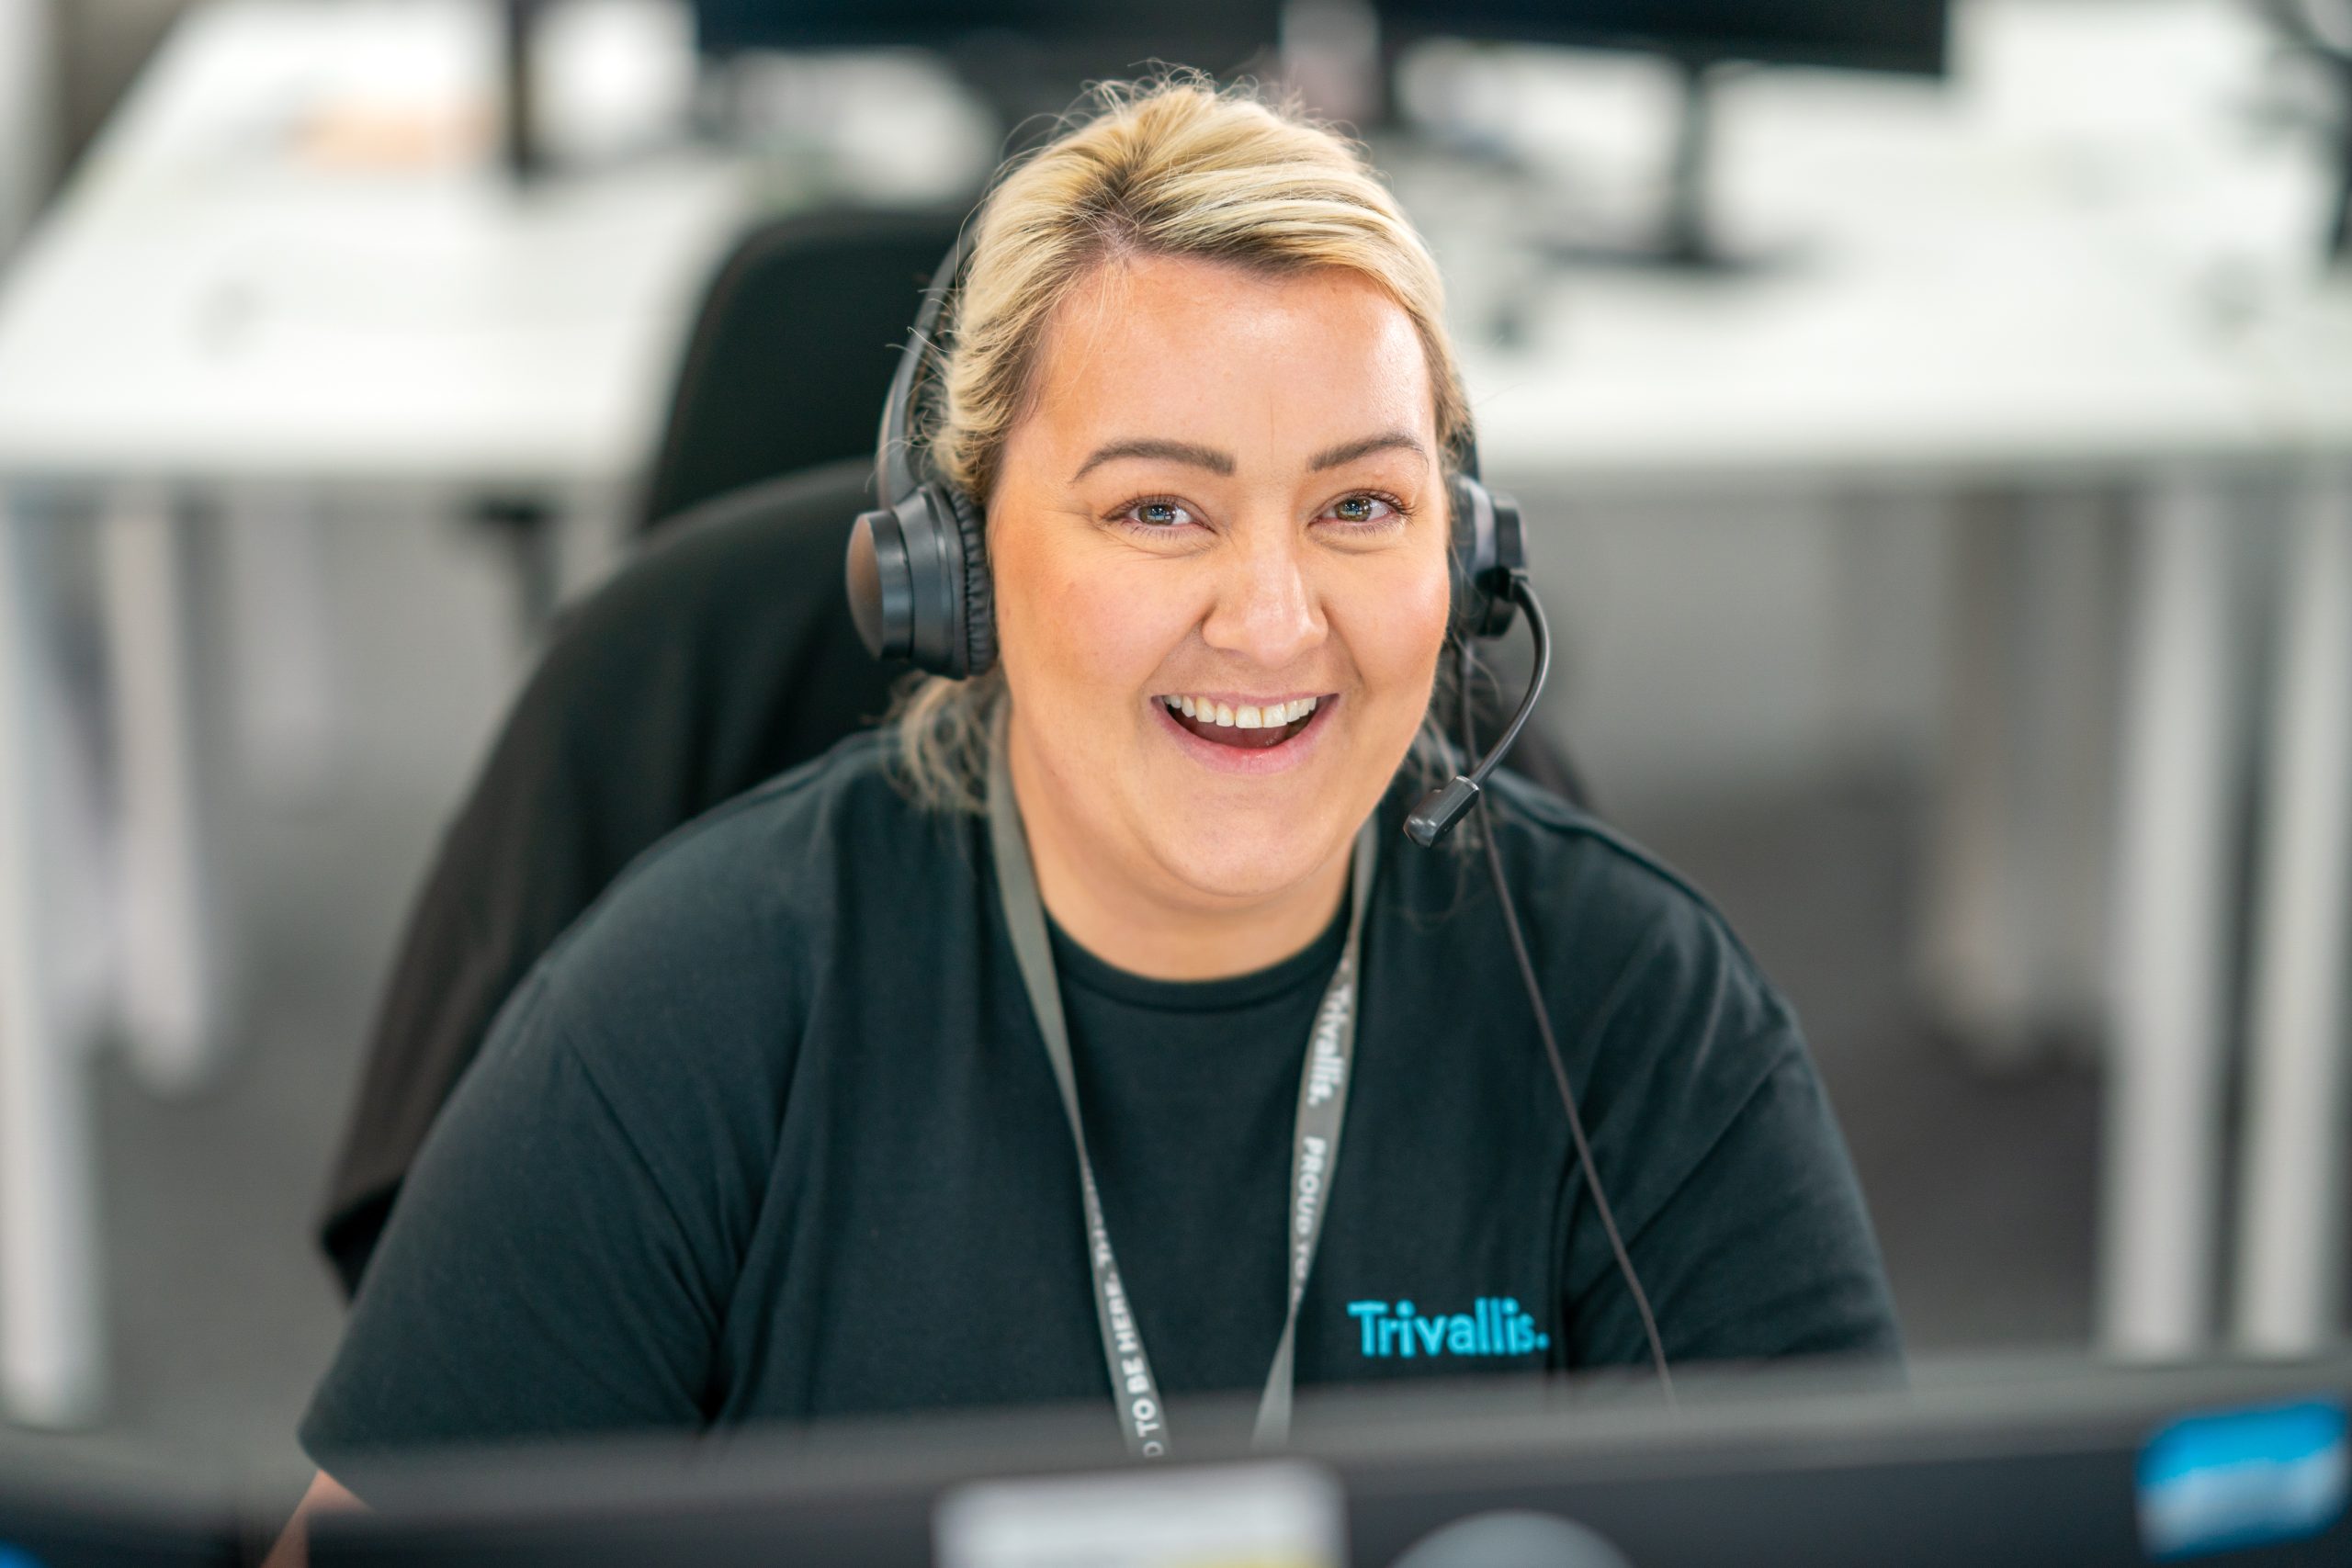 Trivallis Housing Landlord Wales A cheerful woman with blonde hair wearing a headset and a black shirt labelled "Trivallis" is sitting at her desk in a modern office, looking at a computer screen, apparently engaged in a customer service interaction.